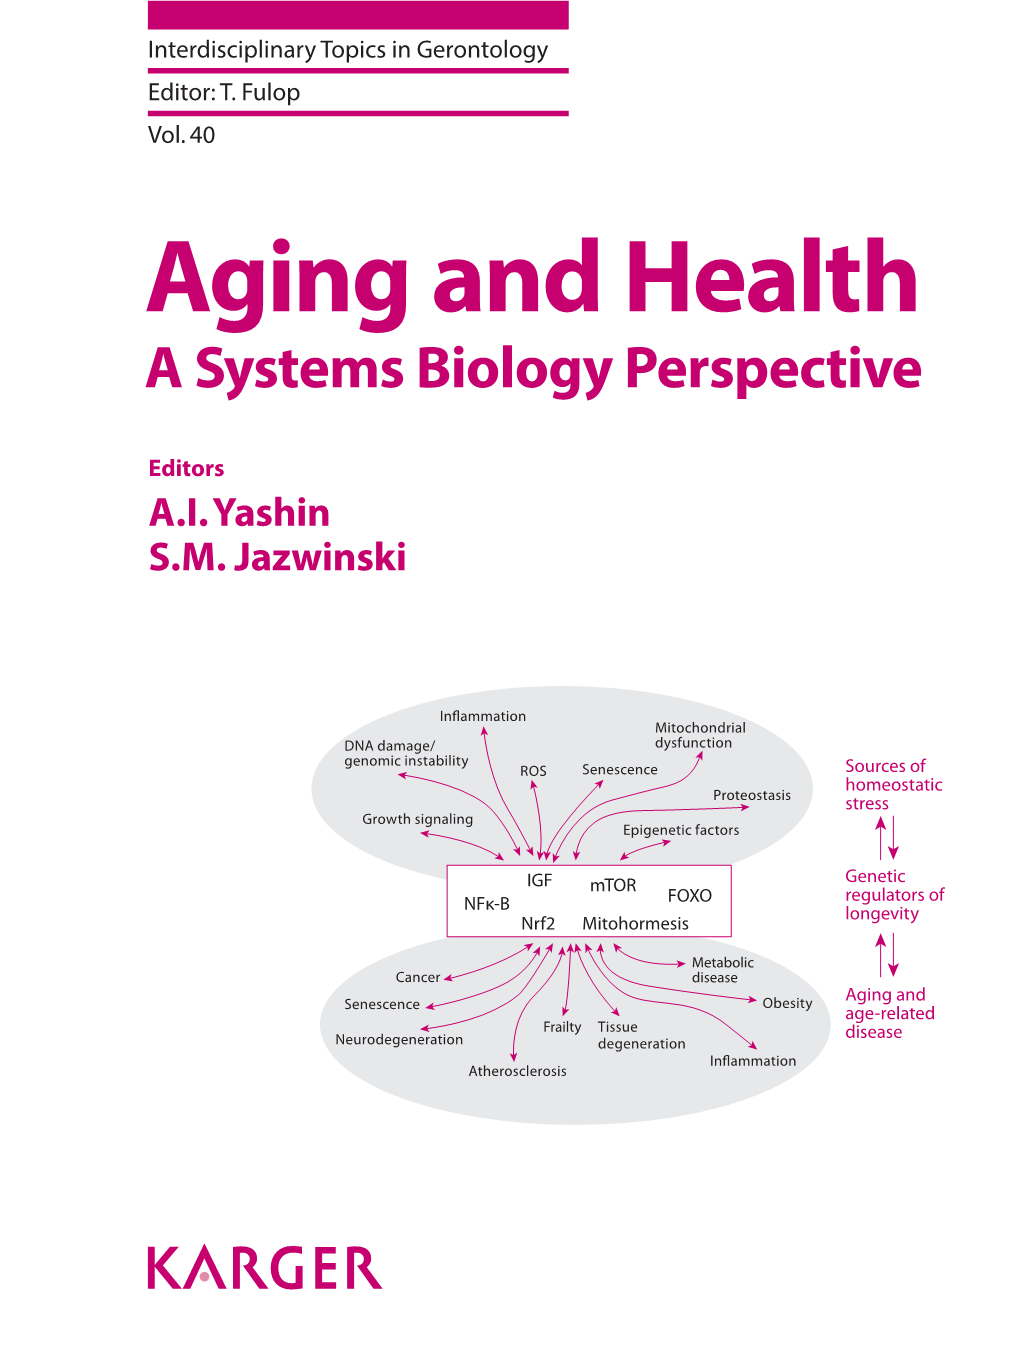 Aging and Health a Systems Biology Perspective